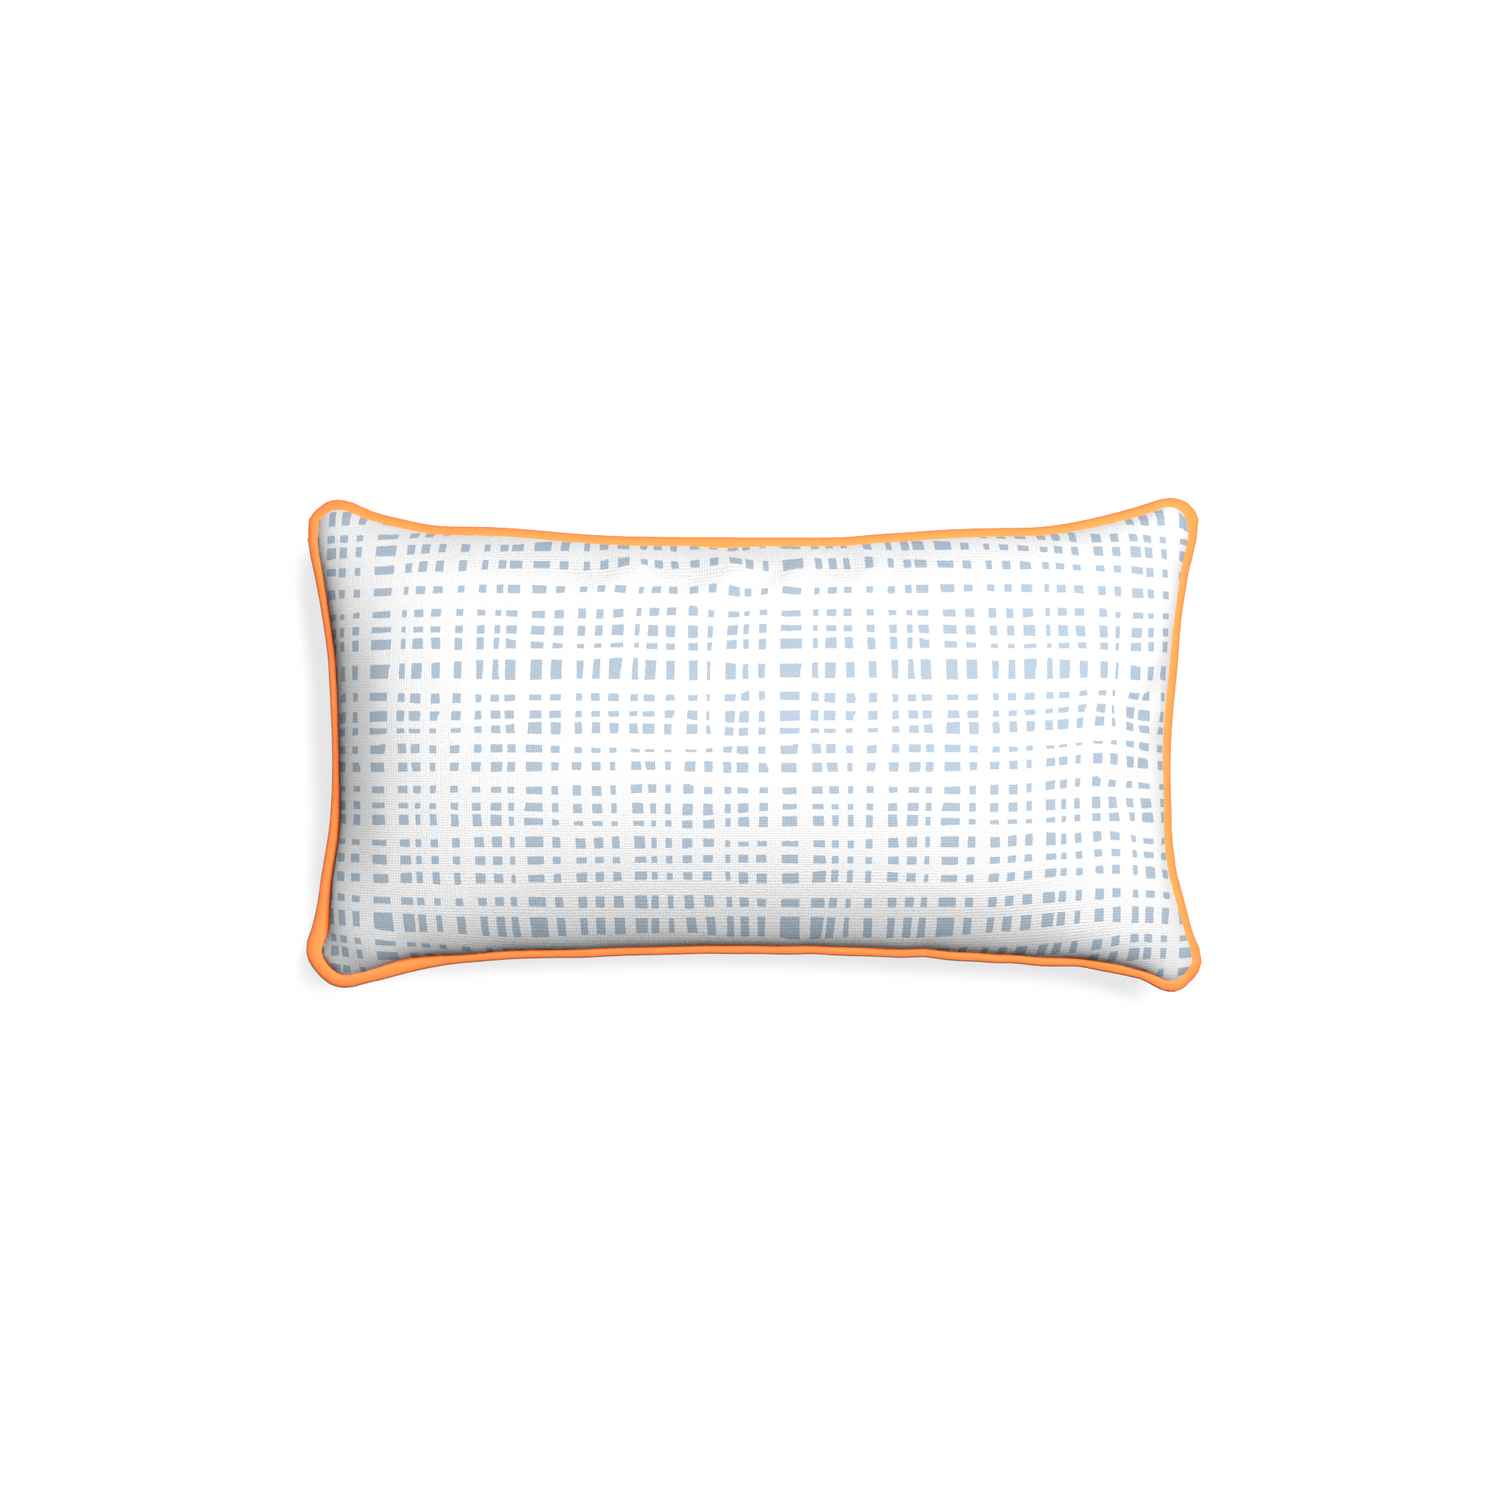 Petite-lumbar ginger sky custom plaid sky bluepillow with clementine piping on white background